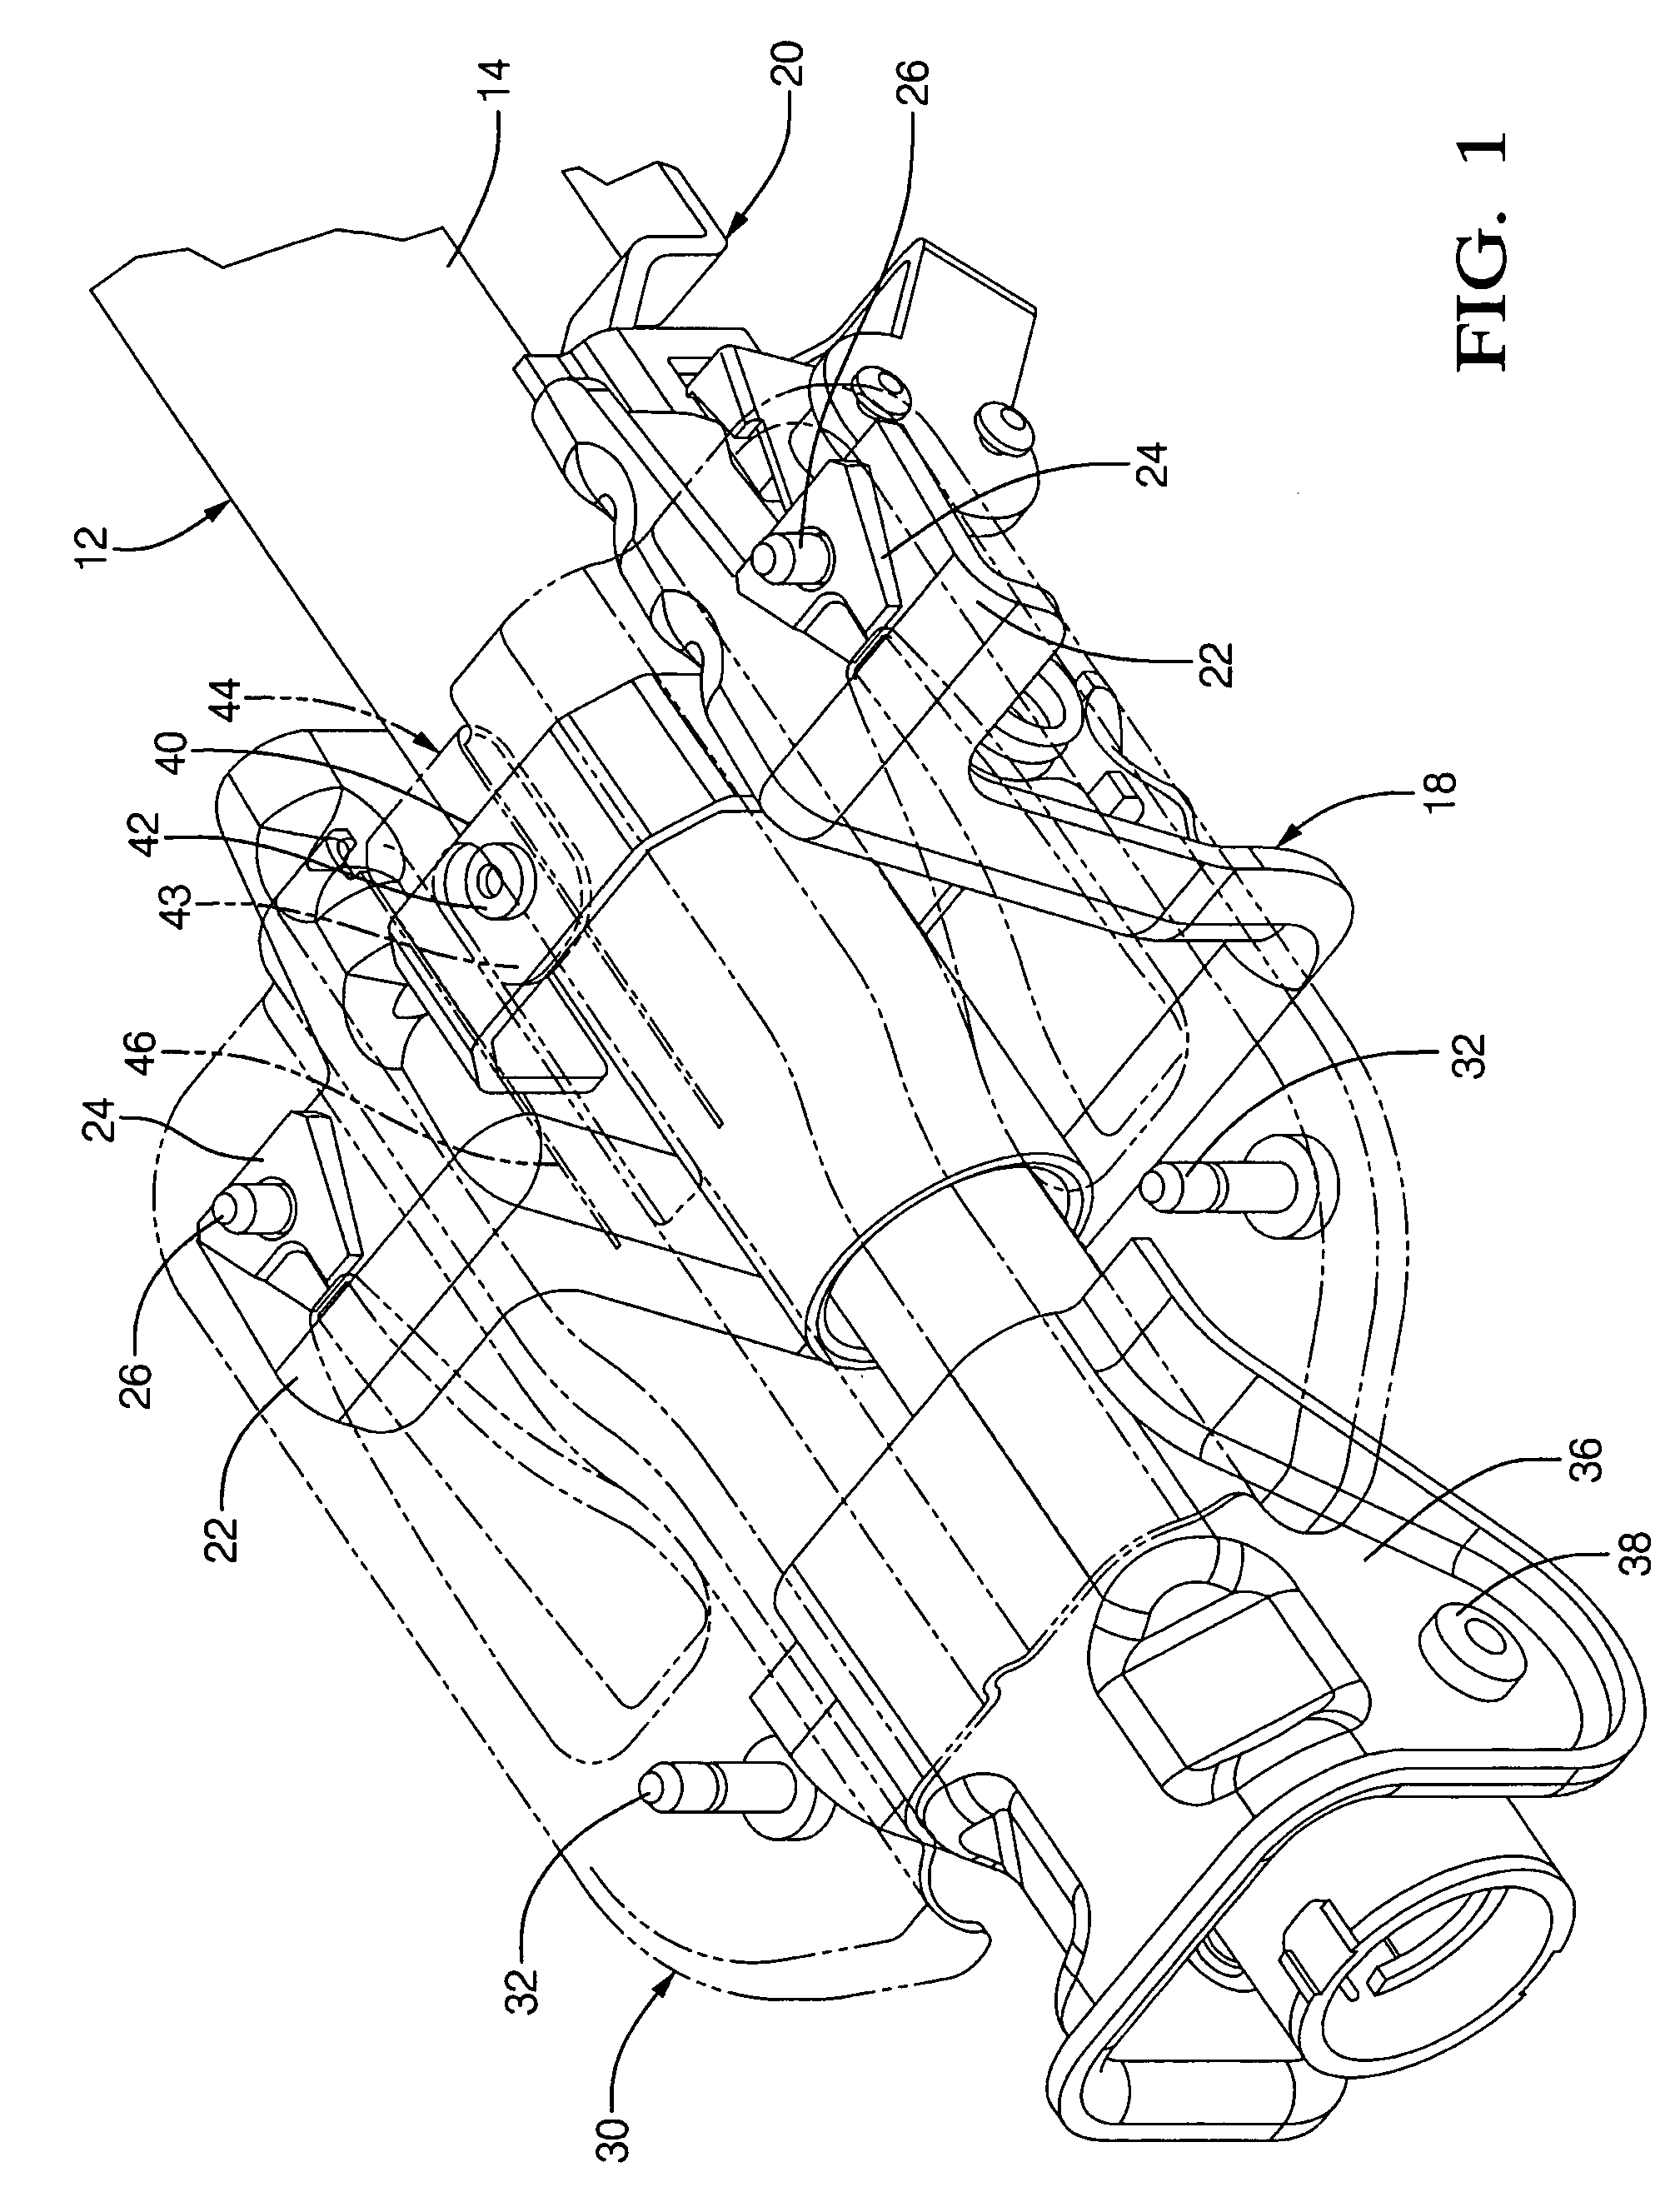 Tuneable energy absorbing mounting structure for steering column